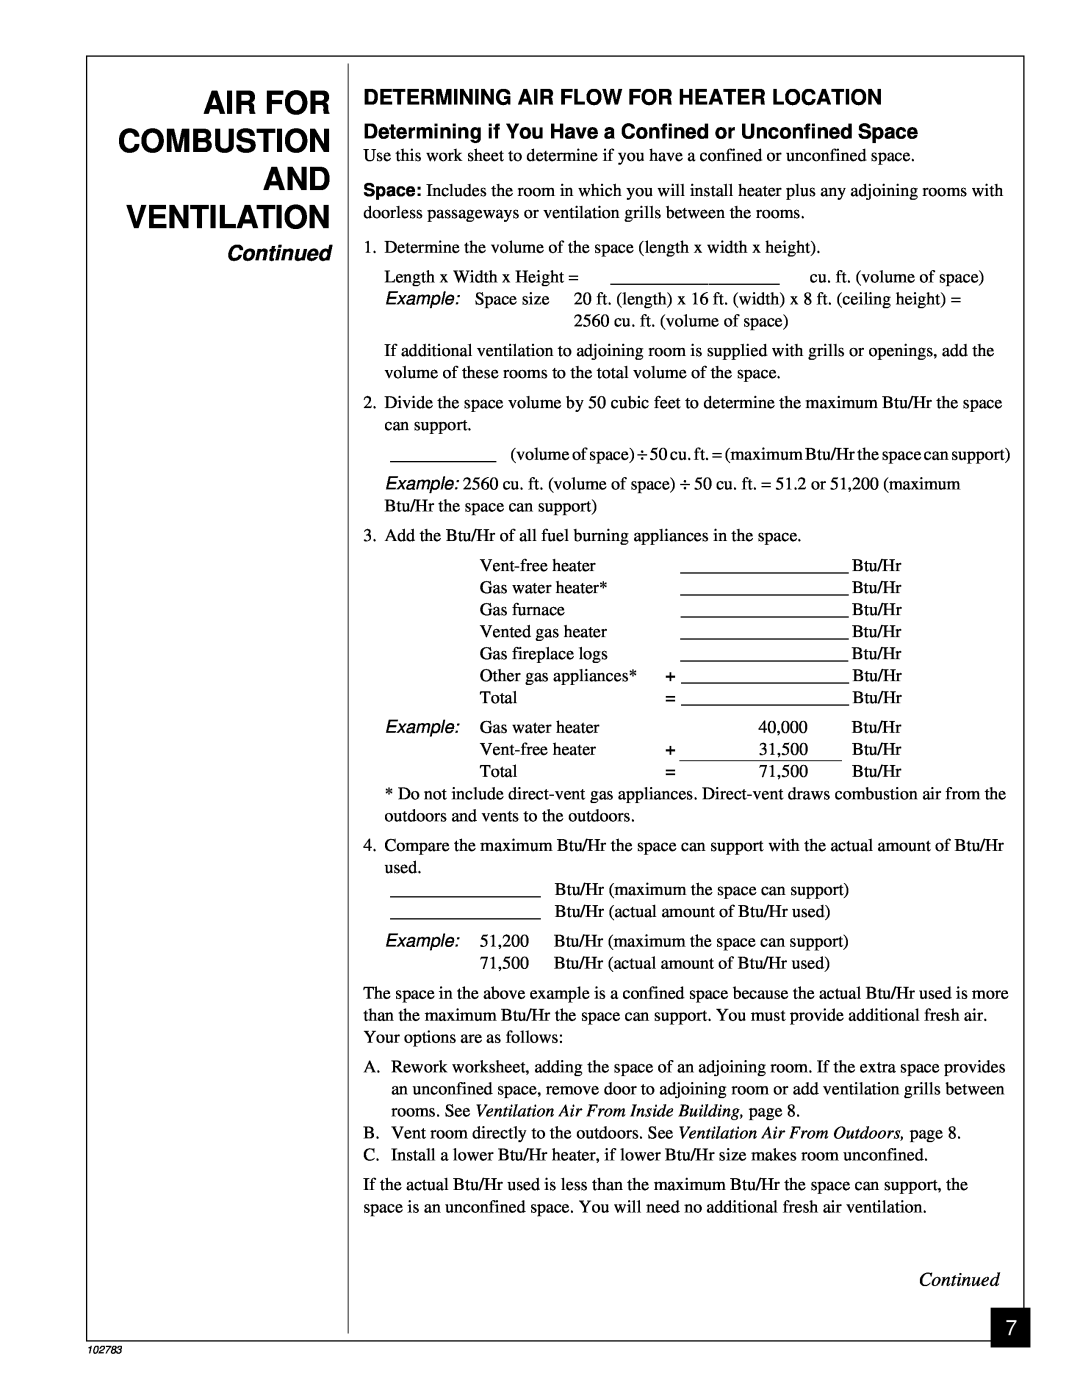 Desa 102783-01B installation manual Air For, Ventilation, Combustion, Continued, Example 51,200 